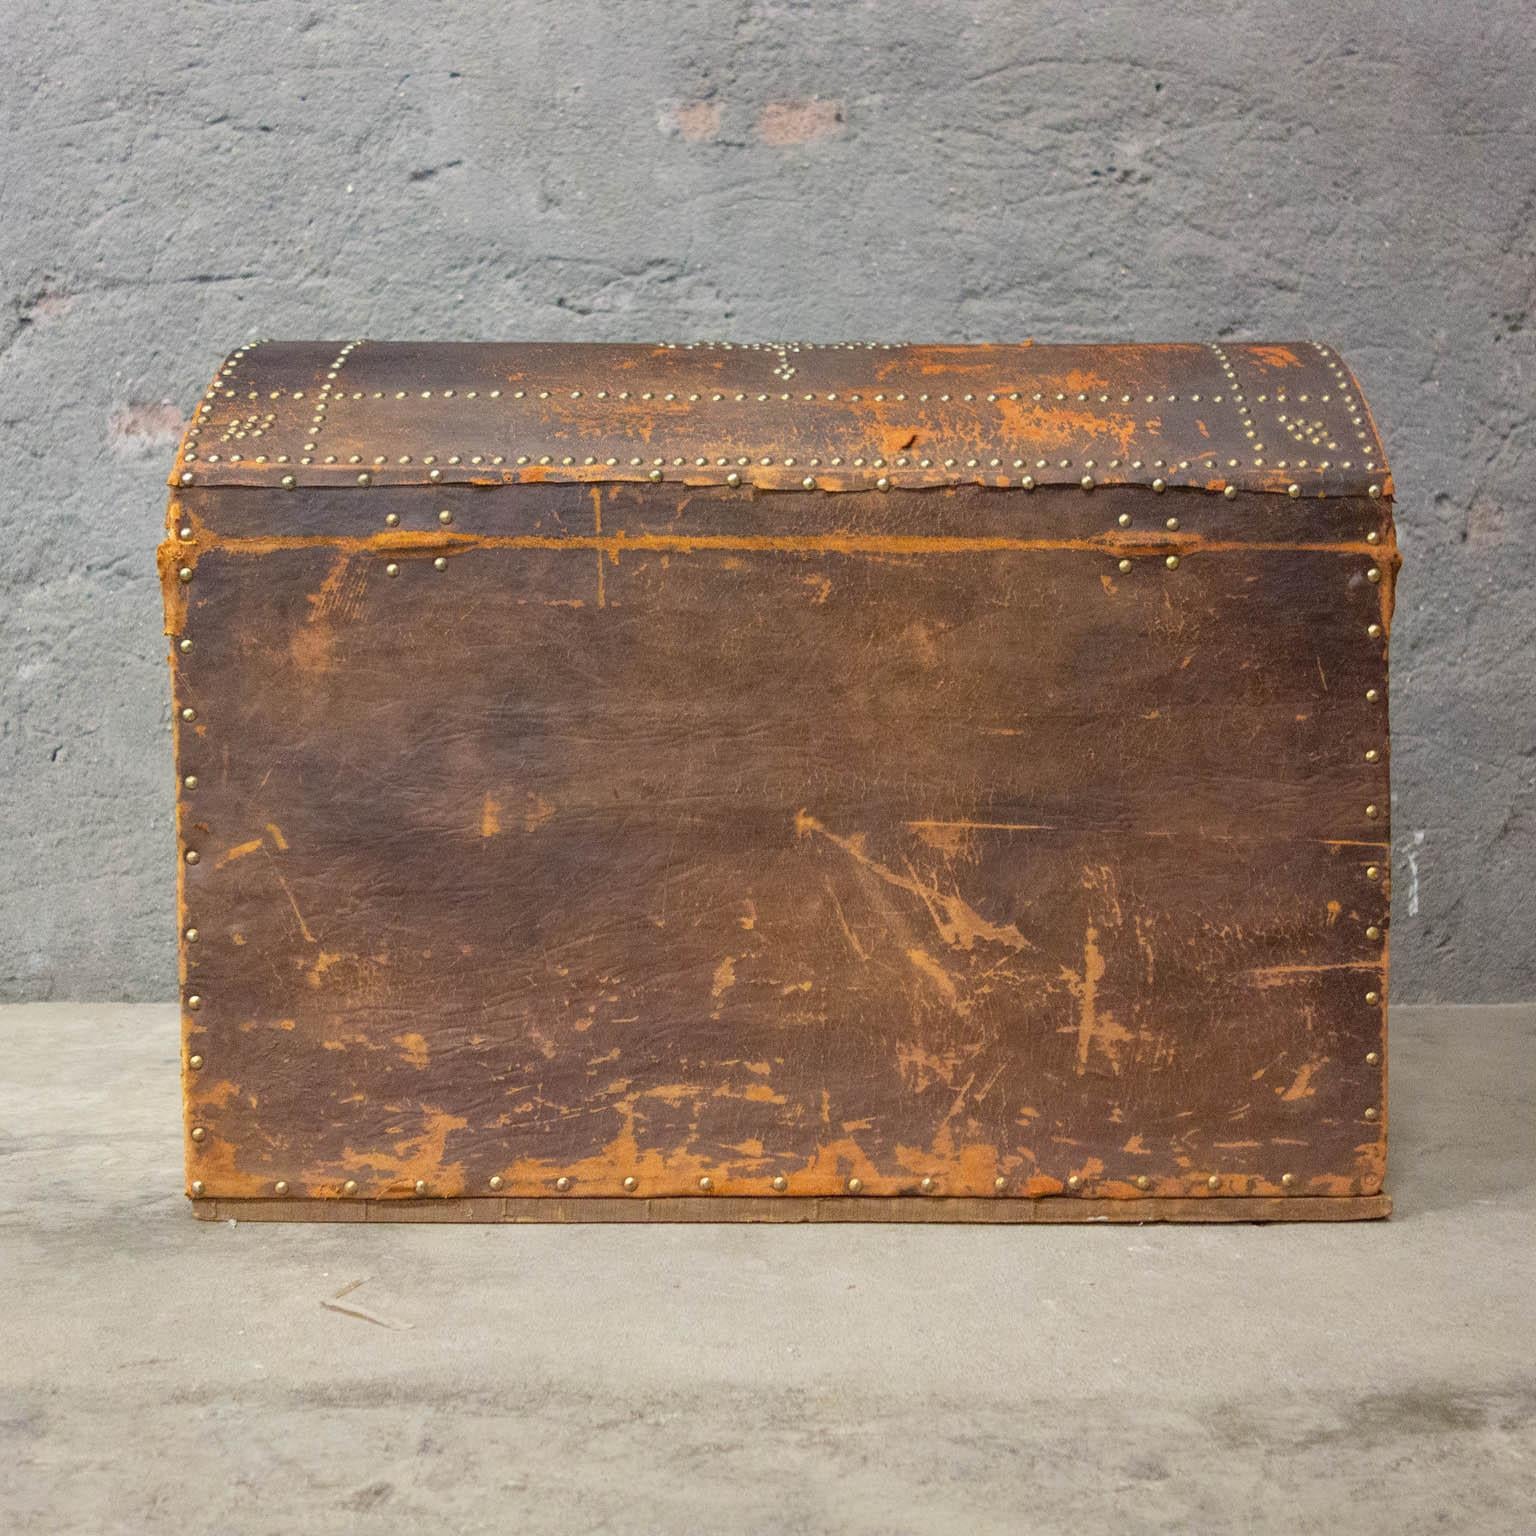 Antique Brown Leather Bridal Box from France, Early 1800 For Sale 4